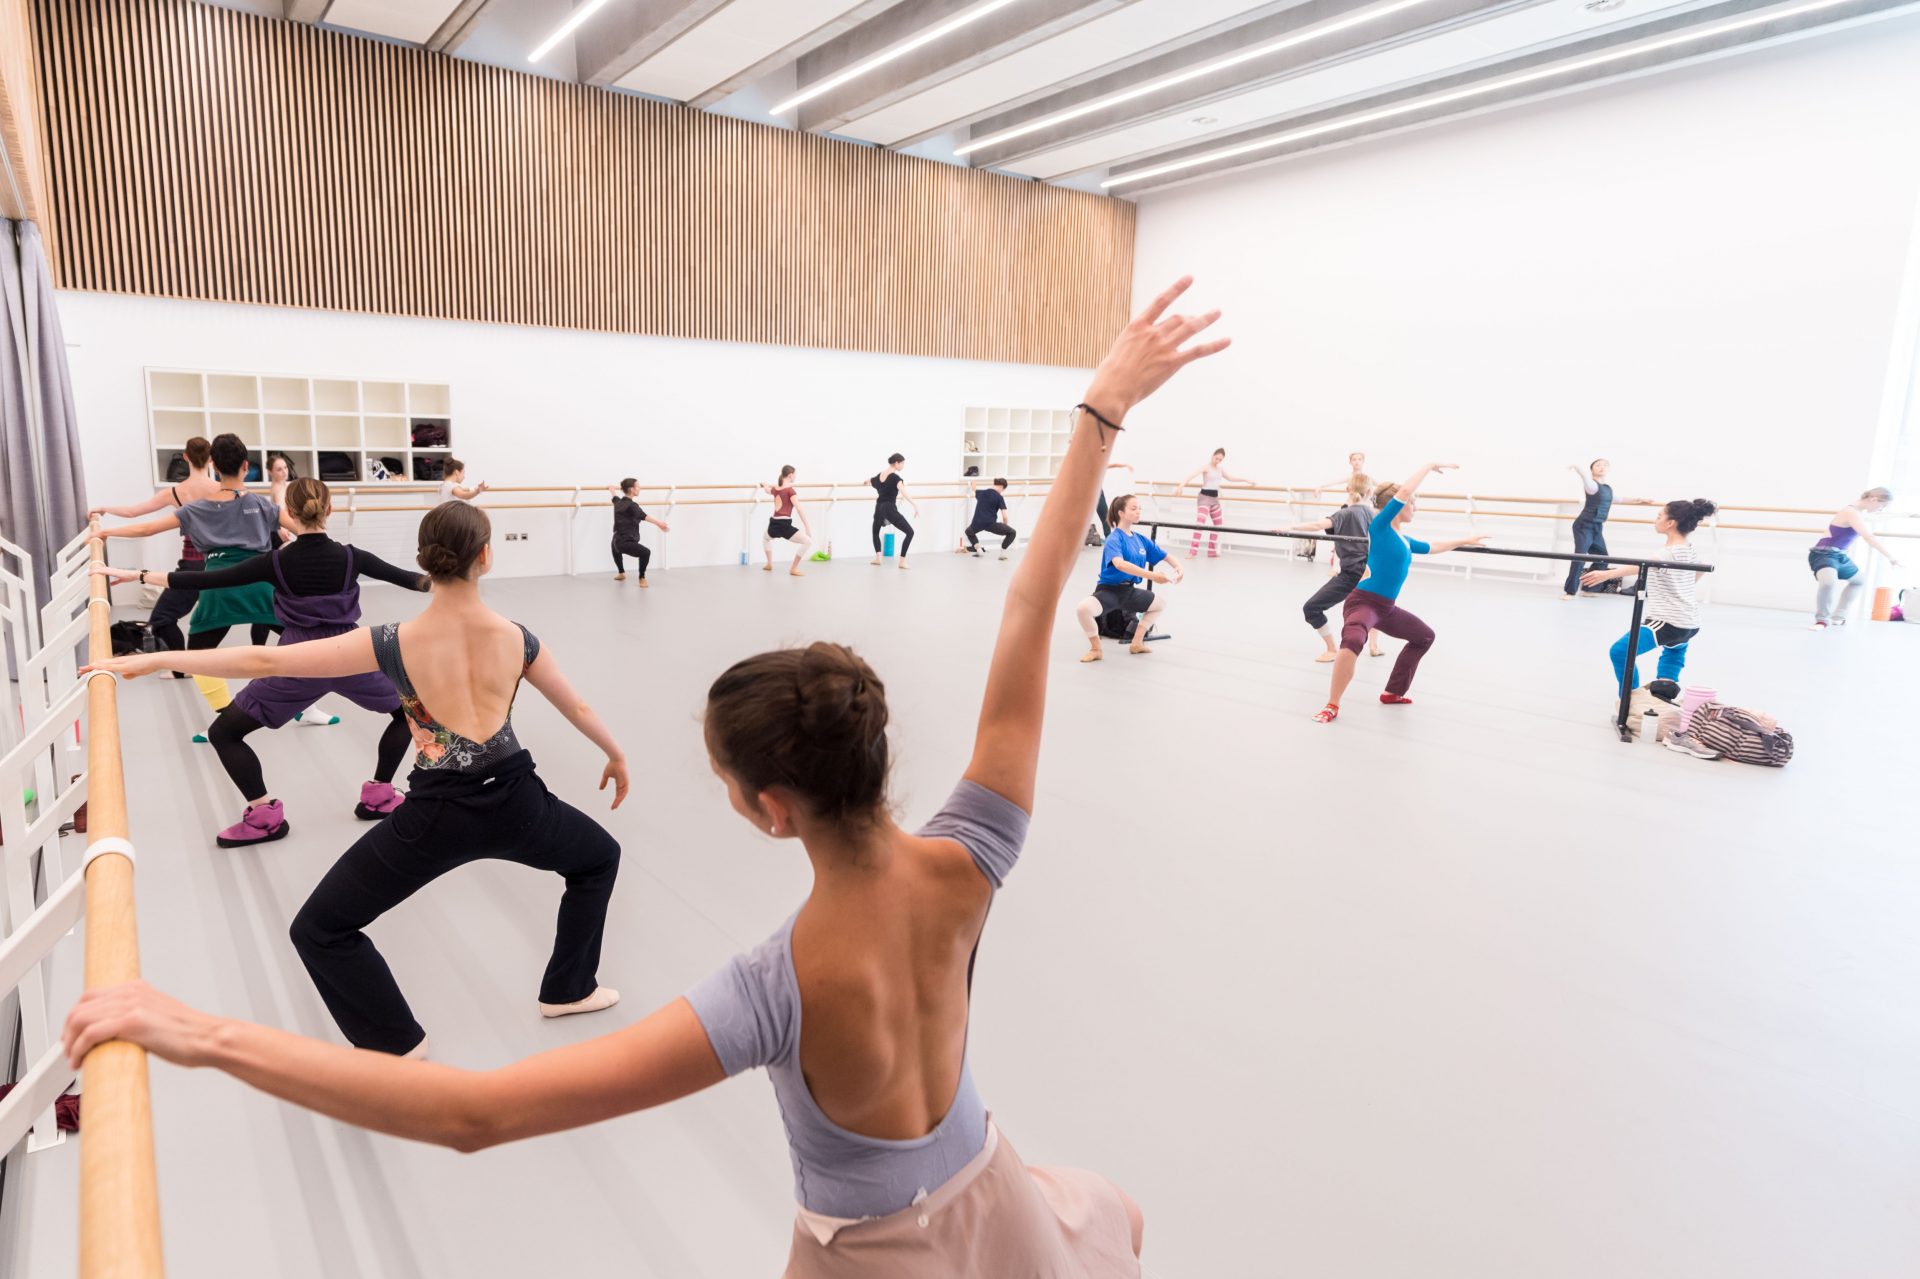 English National Ballet Dancers take class in the studio at the Mulryan Centre for Dance, the Company's East London home (c) Ian Gavan